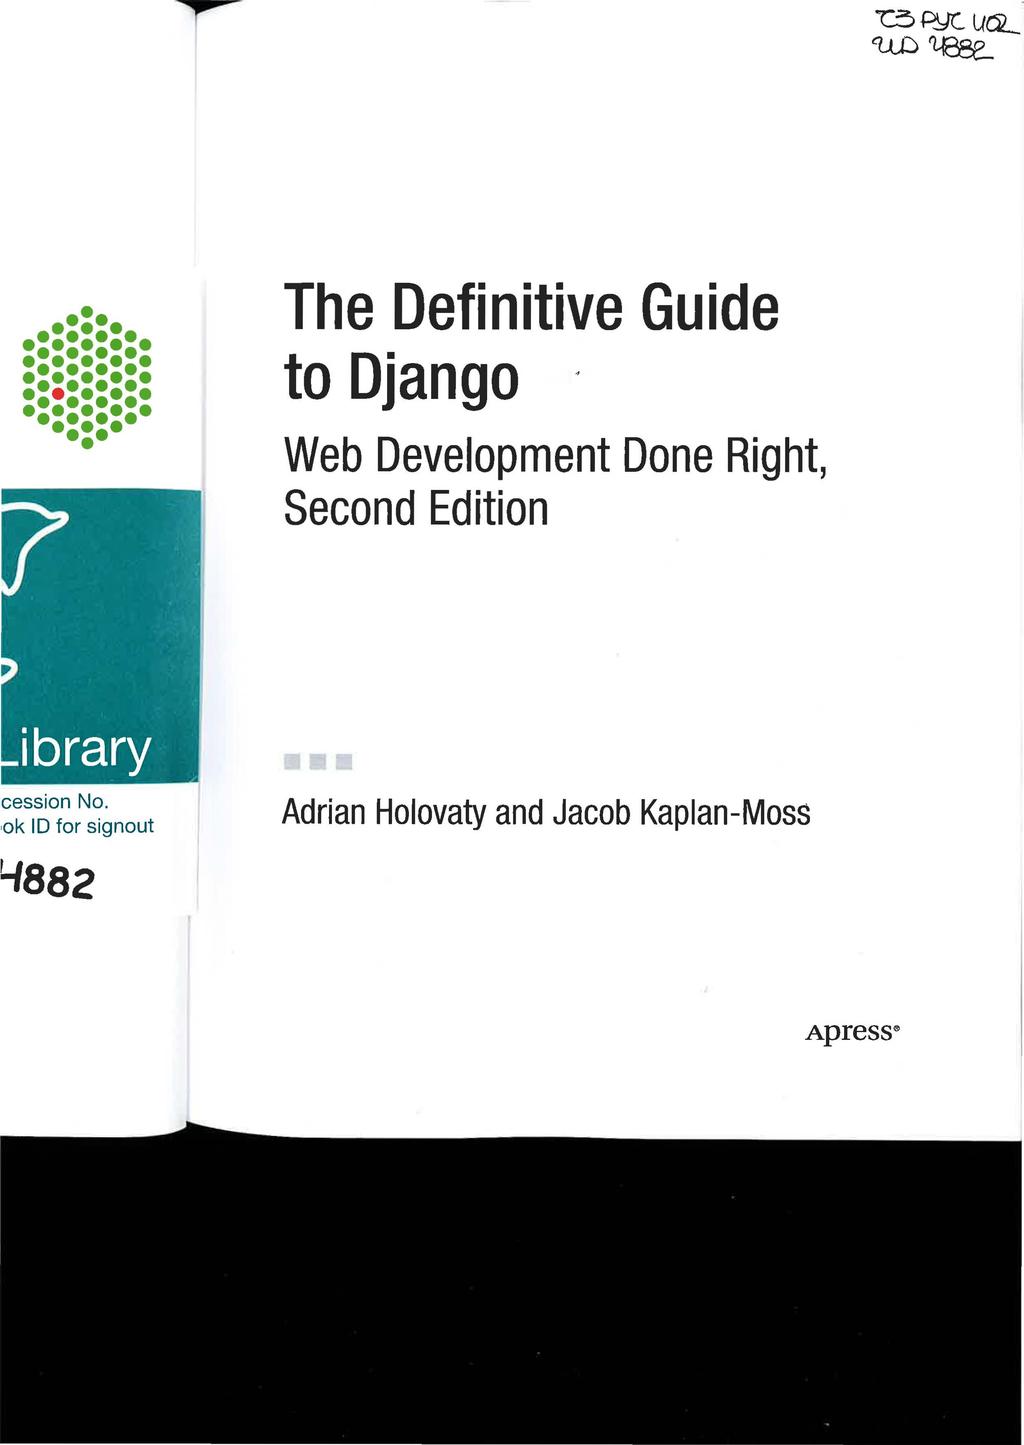 The Definitive Guide to Django Web Development Done Right, Second Edition